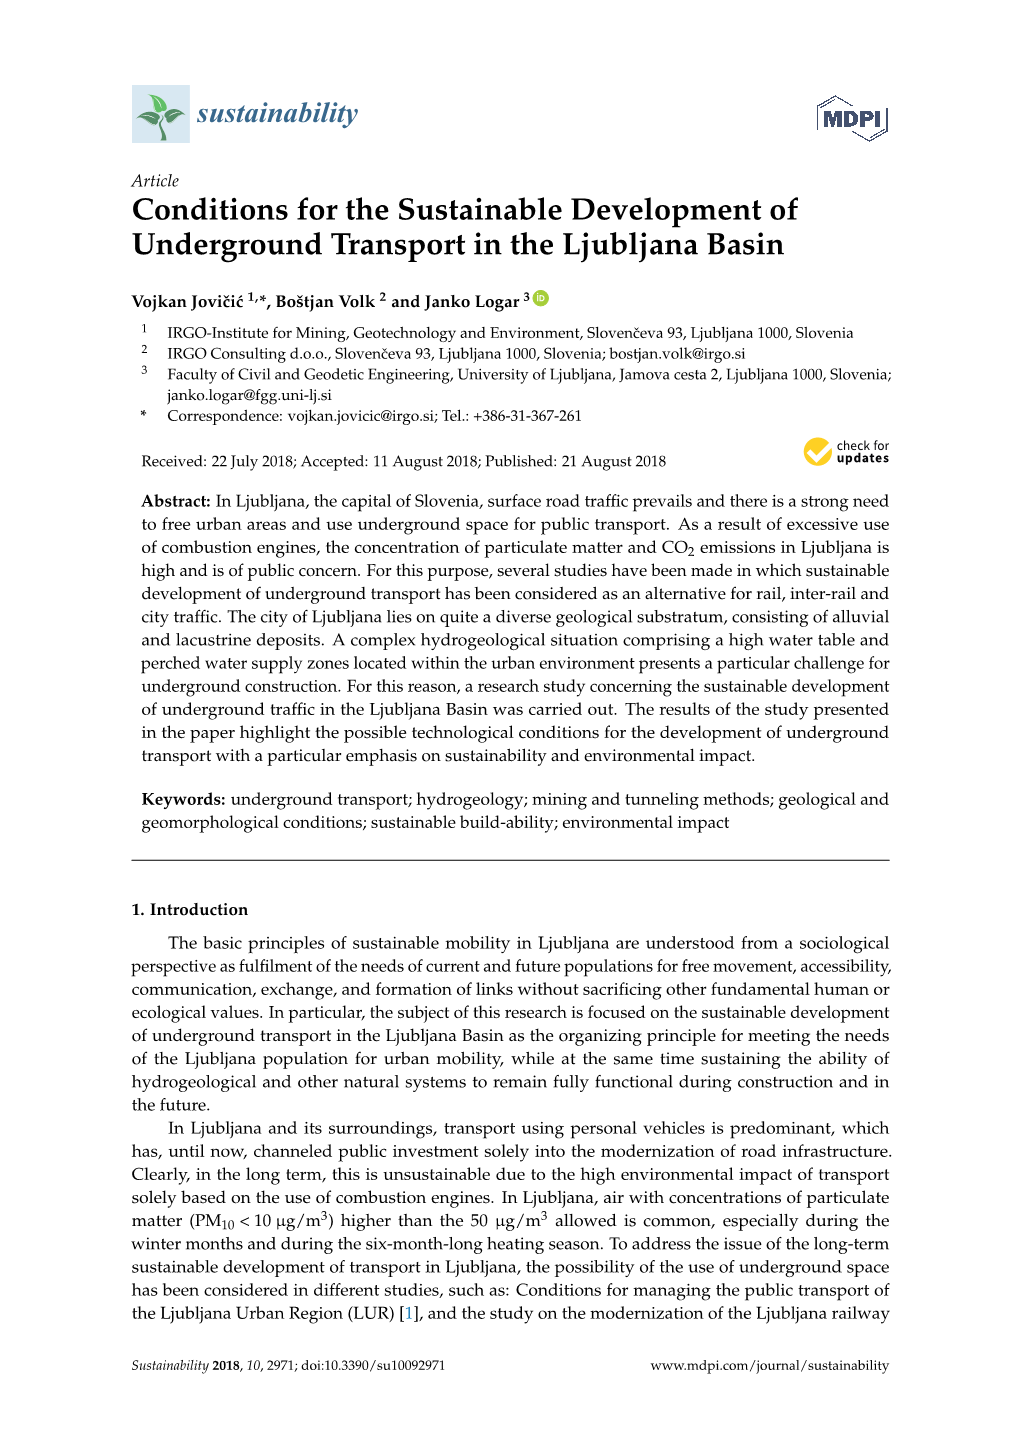 Conditions for the Sustainable Development of Underground Transport in the Ljubljana Basin